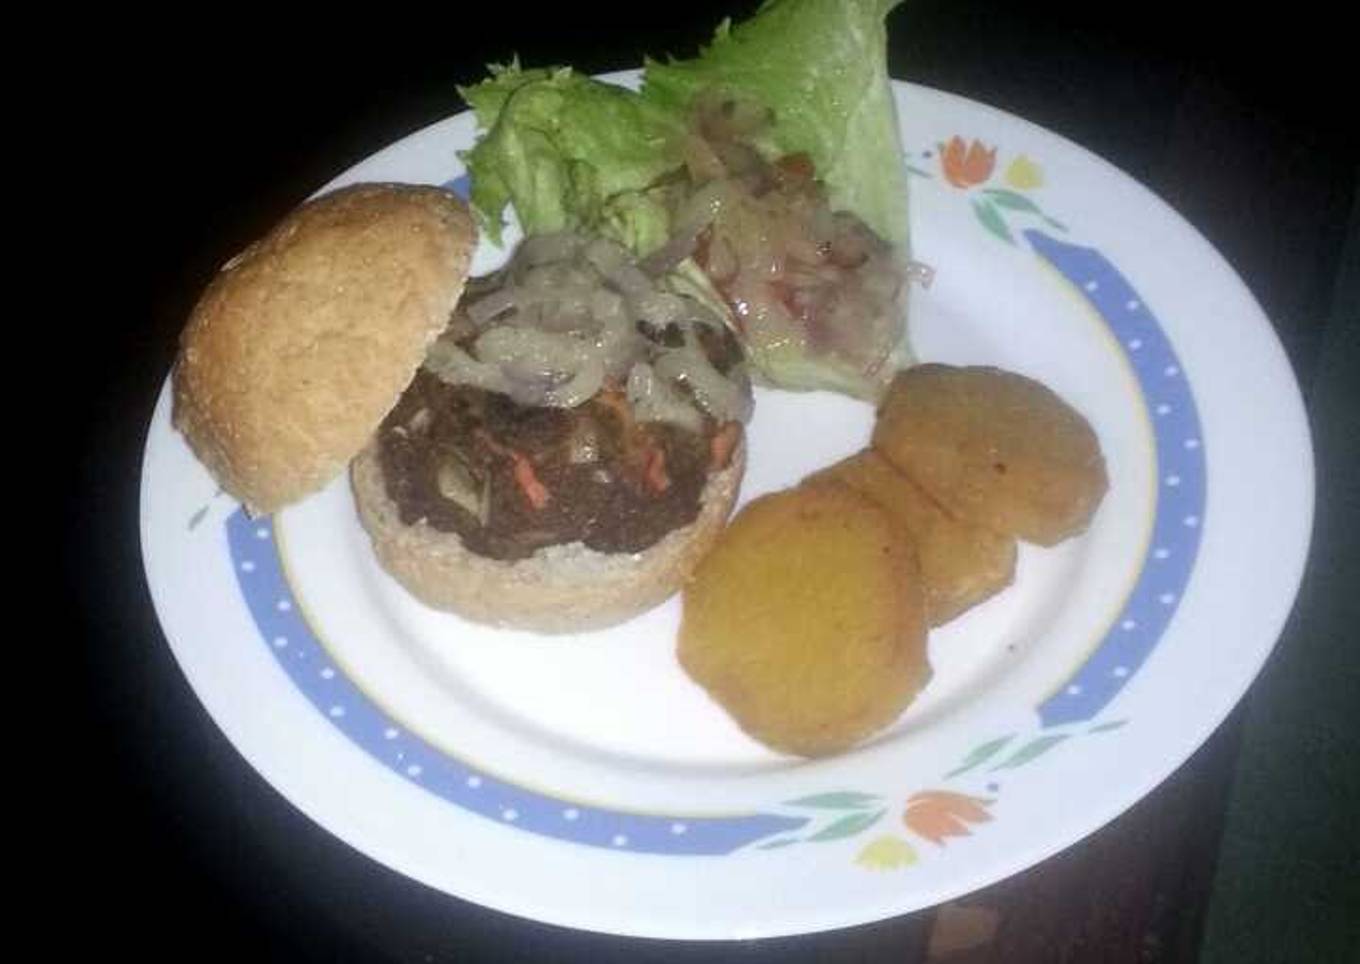 Beef patty with fried sweet potatoes and salad